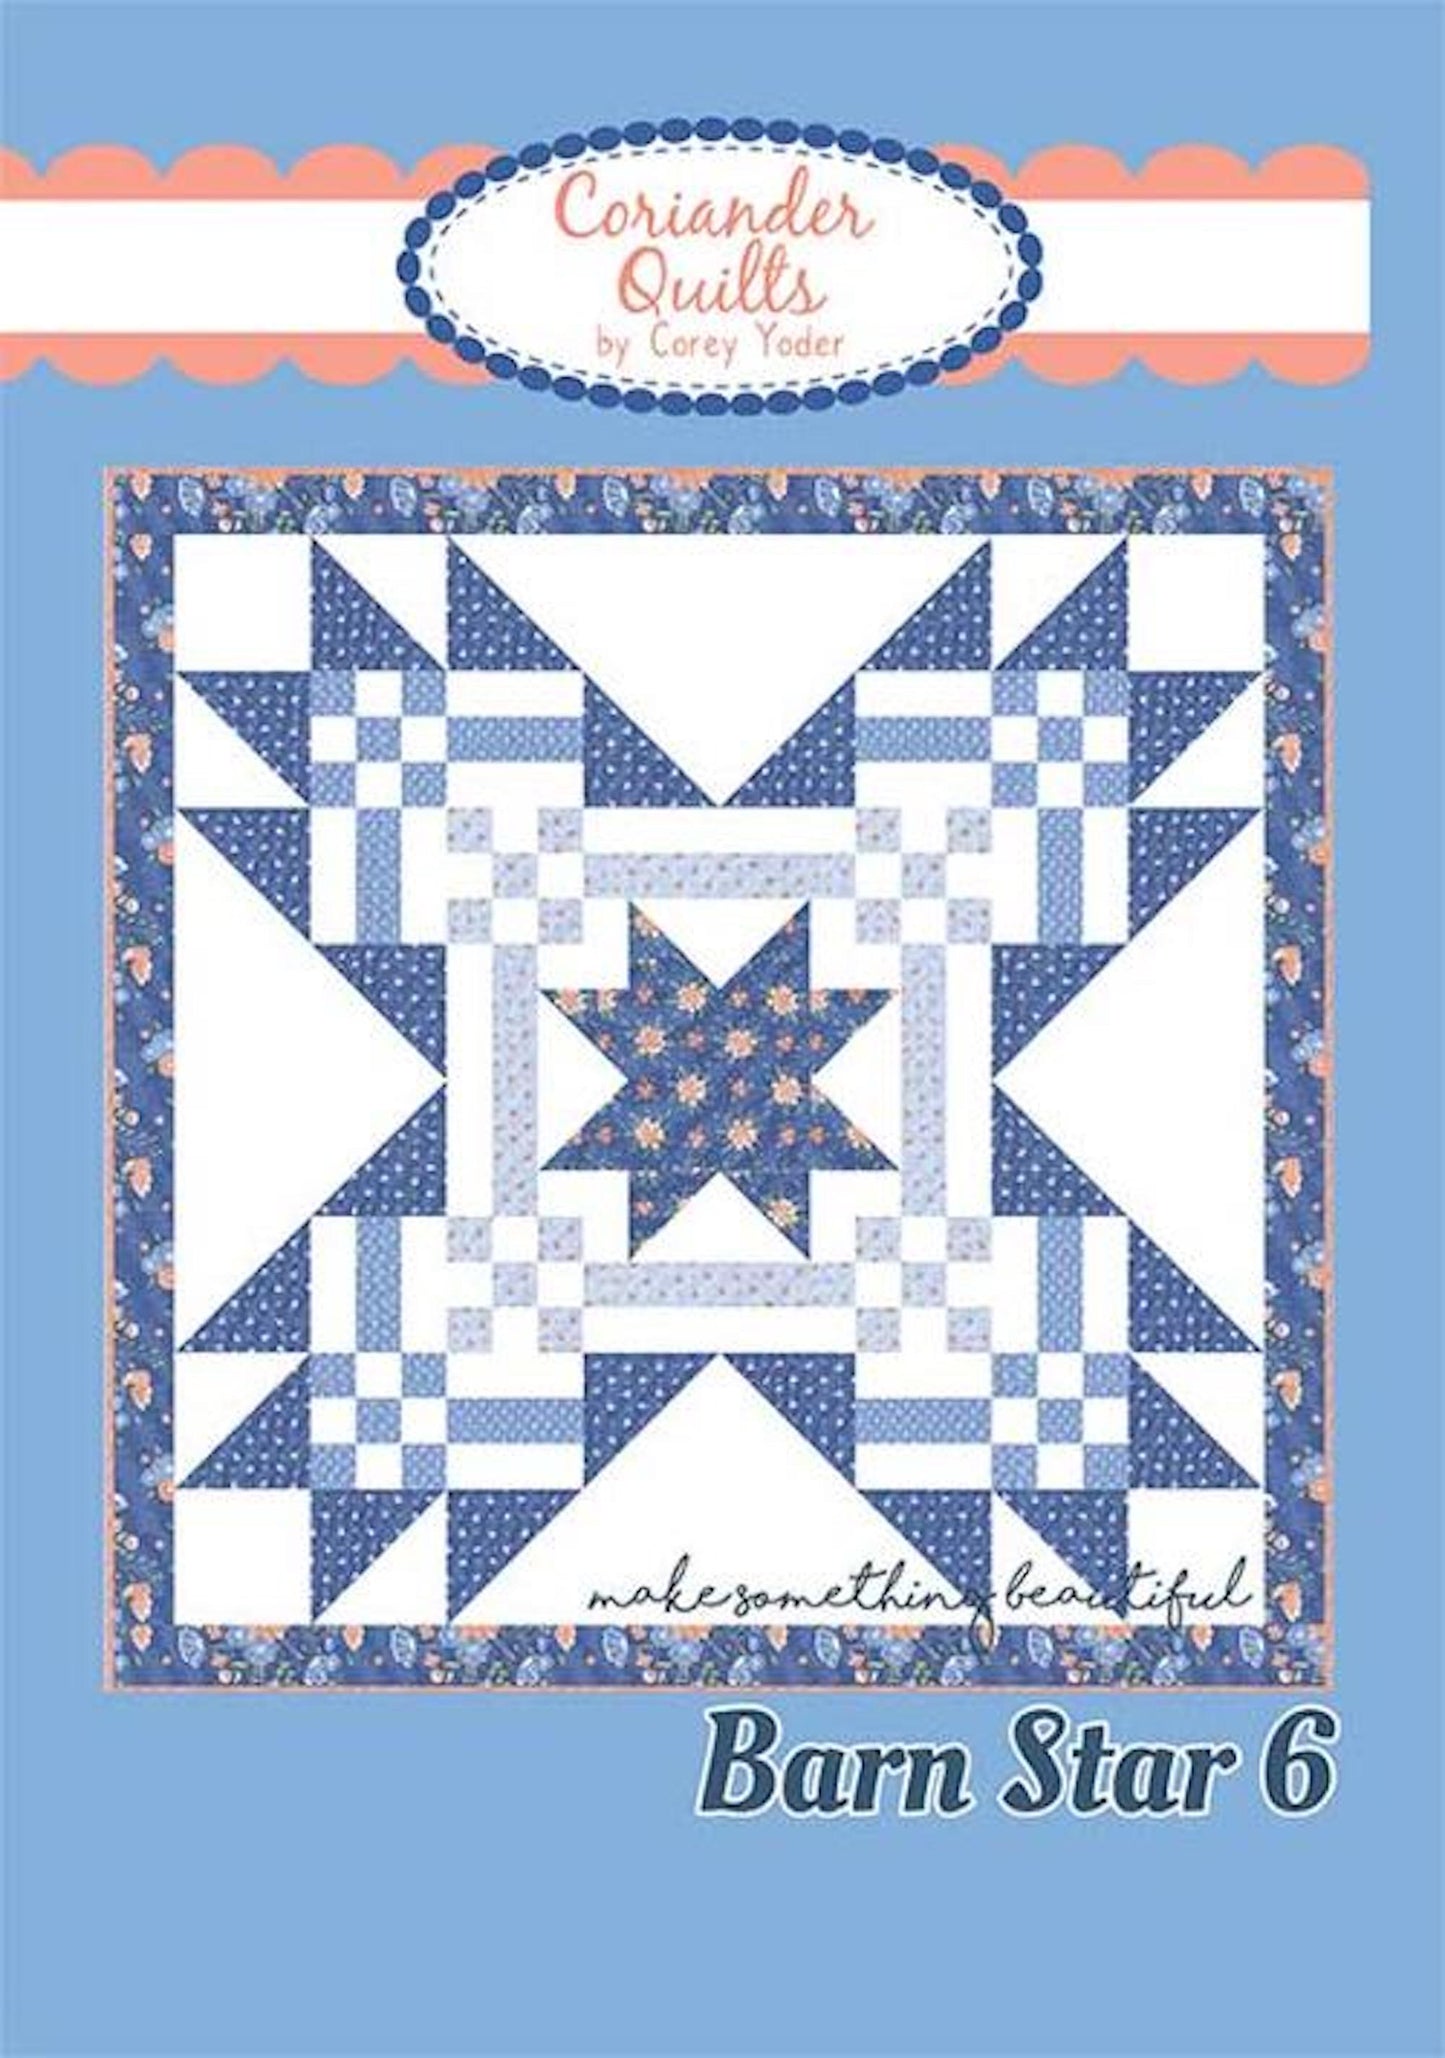 Barn Star Pattern #6 By Coriander Quilts